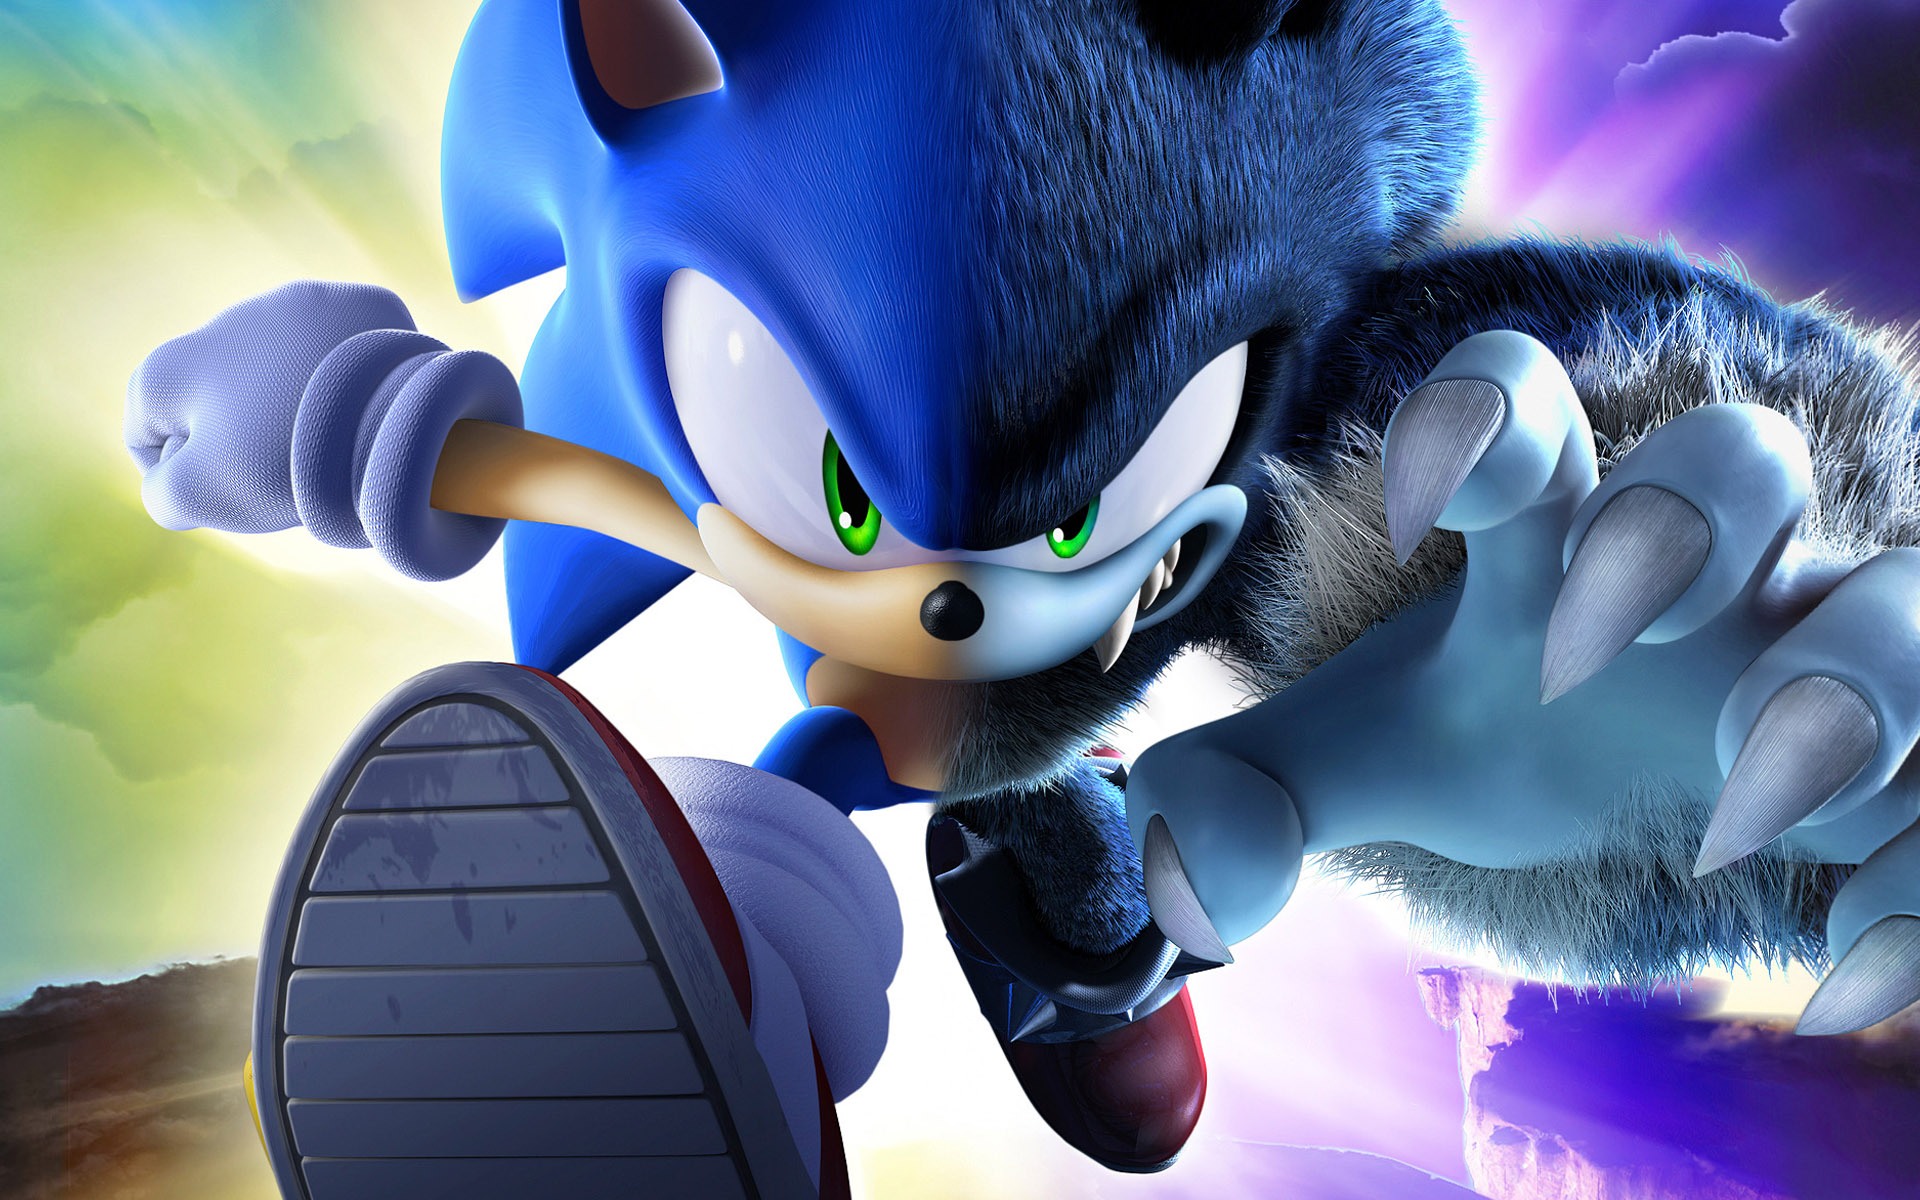 Sonic Unleashed Pc Game Free Download